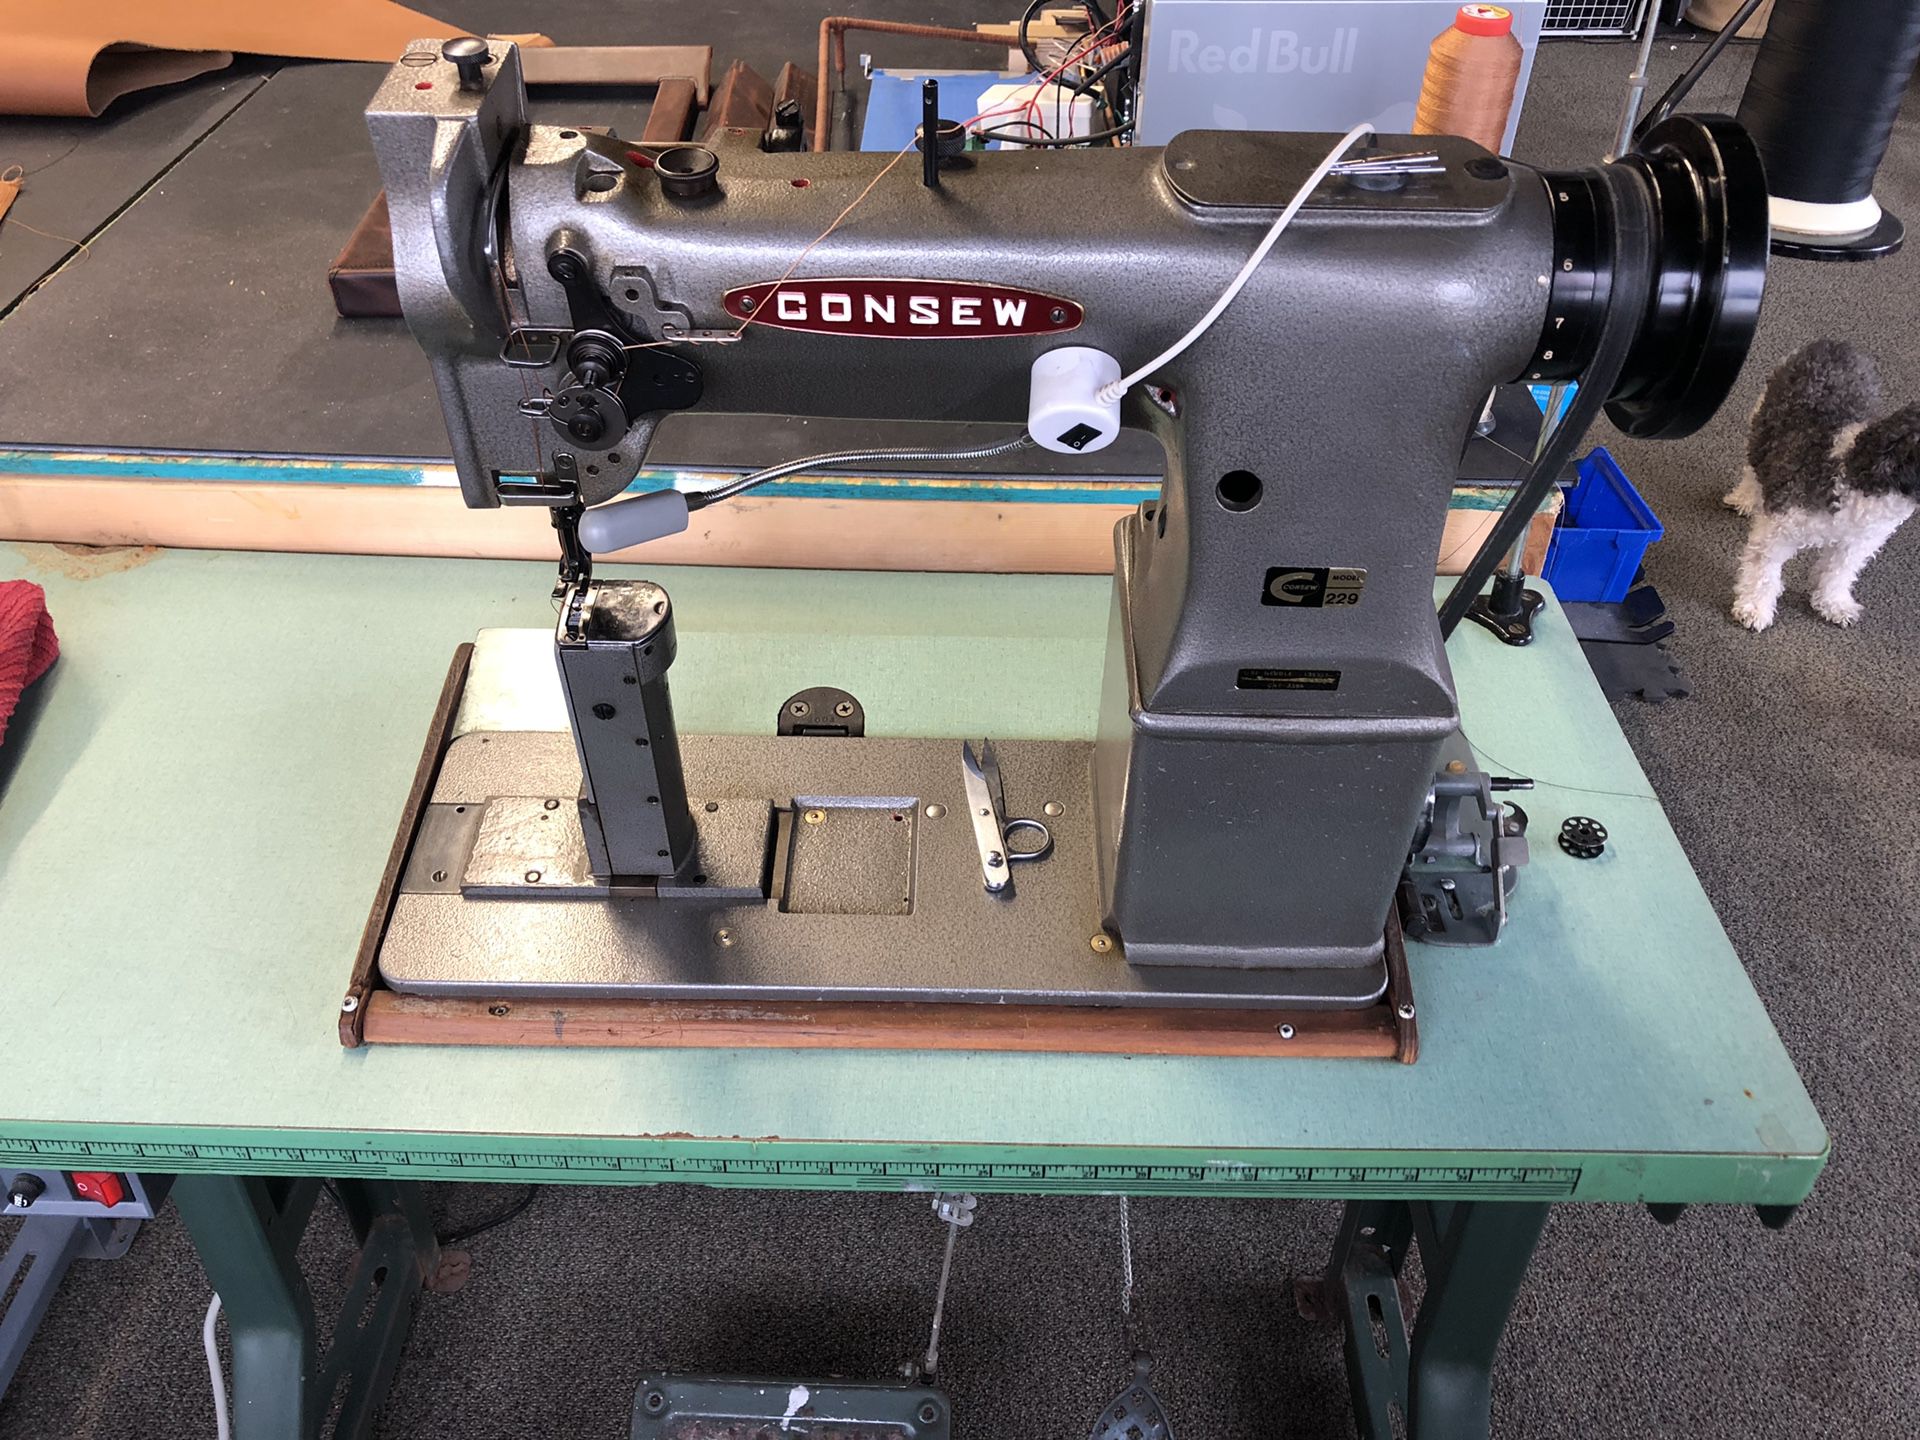 Consew 229 Post Bed Industrial Sewing Machine.